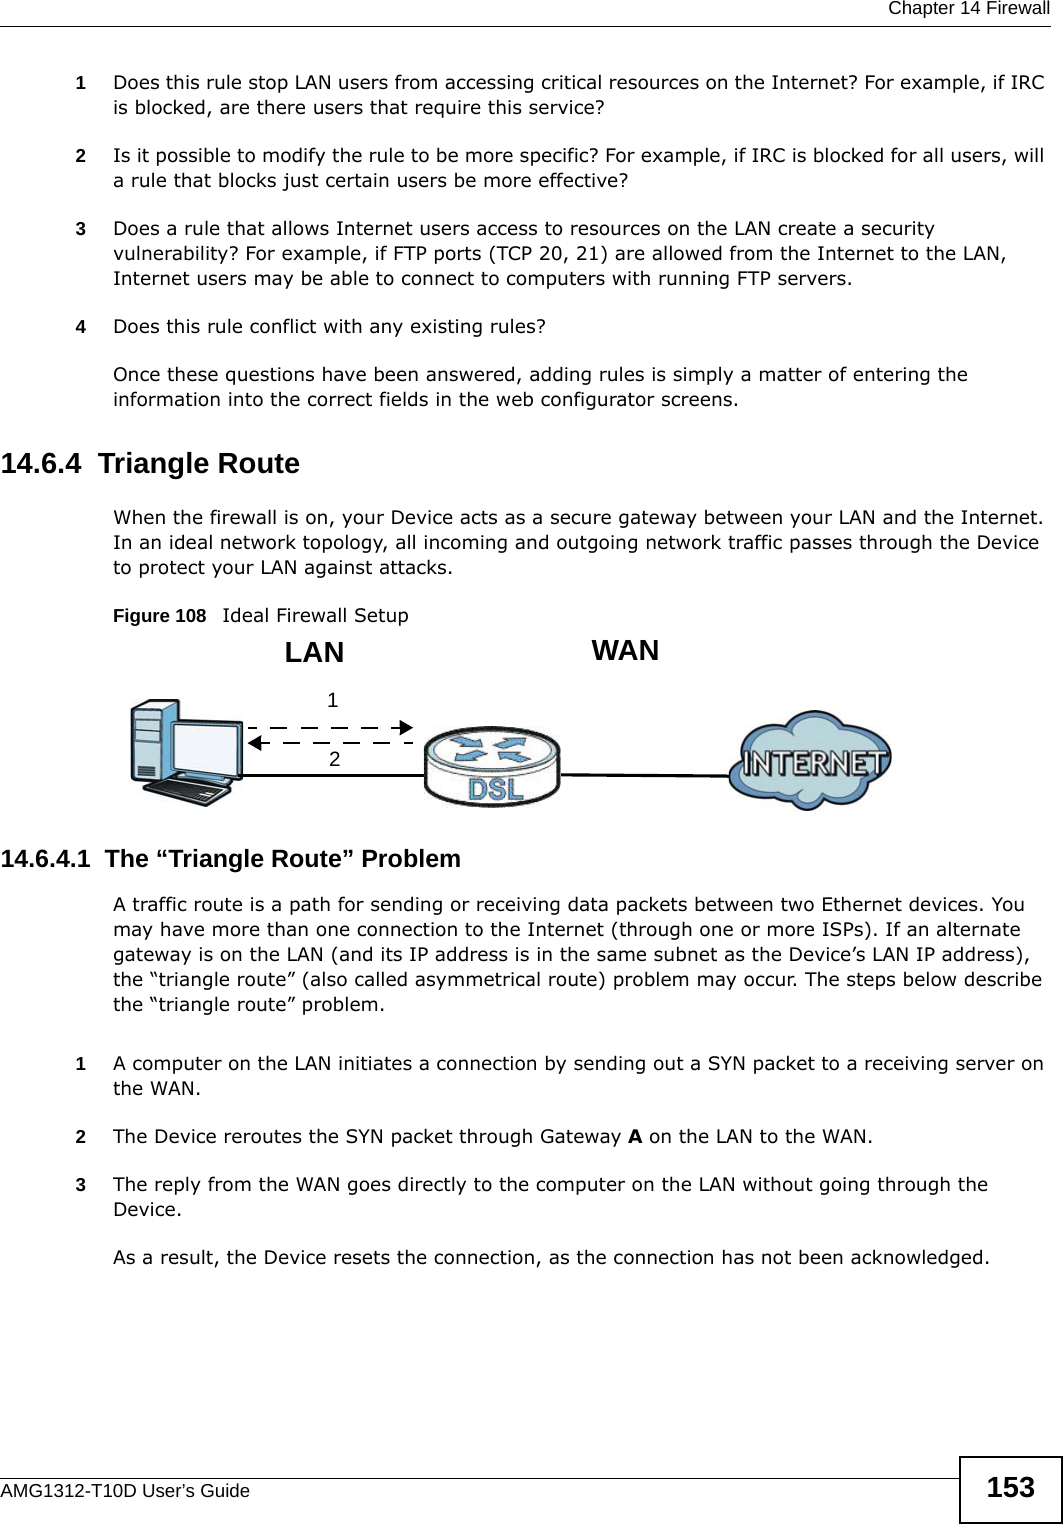  Chapter 14 FirewallAMG1312-T10D User’s Guide 1531Does this rule stop LAN users from accessing critical resources on the Internet? For example, if IRC is blocked, are there users that require this service?2Is it possible to modify the rule to be more specific? For example, if IRC is blocked for all users, will a rule that blocks just certain users be more effective?3Does a rule that allows Internet users access to resources on the LAN create a security vulnerability? For example, if FTP ports (TCP 20, 21) are allowed from the Internet to the LAN, Internet users may be able to connect to computers with running FTP servers.4Does this rule conflict with any existing rules?Once these questions have been answered, adding rules is simply a matter of entering the information into the correct fields in the web configurator screens.14.6.4  Triangle RouteWhen the firewall is on, your Device acts as a secure gateway between your LAN and the Internet. In an ideal network topology, all incoming and outgoing network traffic passes through the Device to protect your LAN against attacks.Figure 108   Ideal Firewall Setup14.6.4.1  The “Triangle Route” ProblemA traffic route is a path for sending or receiving data packets between two Ethernet devices. You may have more than one connection to the Internet (through one or more ISPs). If an alternate gateway is on the LAN (and its IP address is in the same subnet as the Device’s LAN IP address), the “triangle route” (also called asymmetrical route) problem may occur. The steps below describe the “triangle route” problem. 1A computer on the LAN initiates a connection by sending out a SYN packet to a receiving server on the WAN.2The Device reroutes the SYN packet through Gateway A on the LAN to the WAN. 3The reply from the WAN goes directly to the computer on the LAN without going through the Device. As a result, the Device resets the connection, as the connection has not been acknowledged.12WANLAN